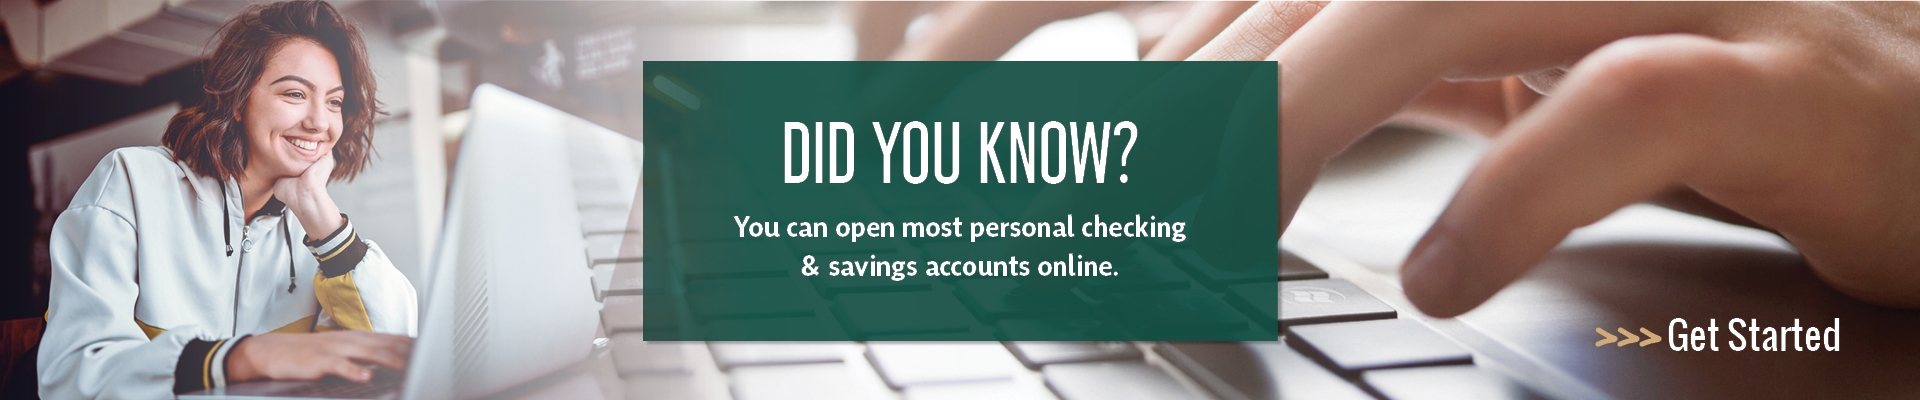 Did you know? You can open most personal checking and savings accoutnts online. Photo of girl on laptop.  Banner